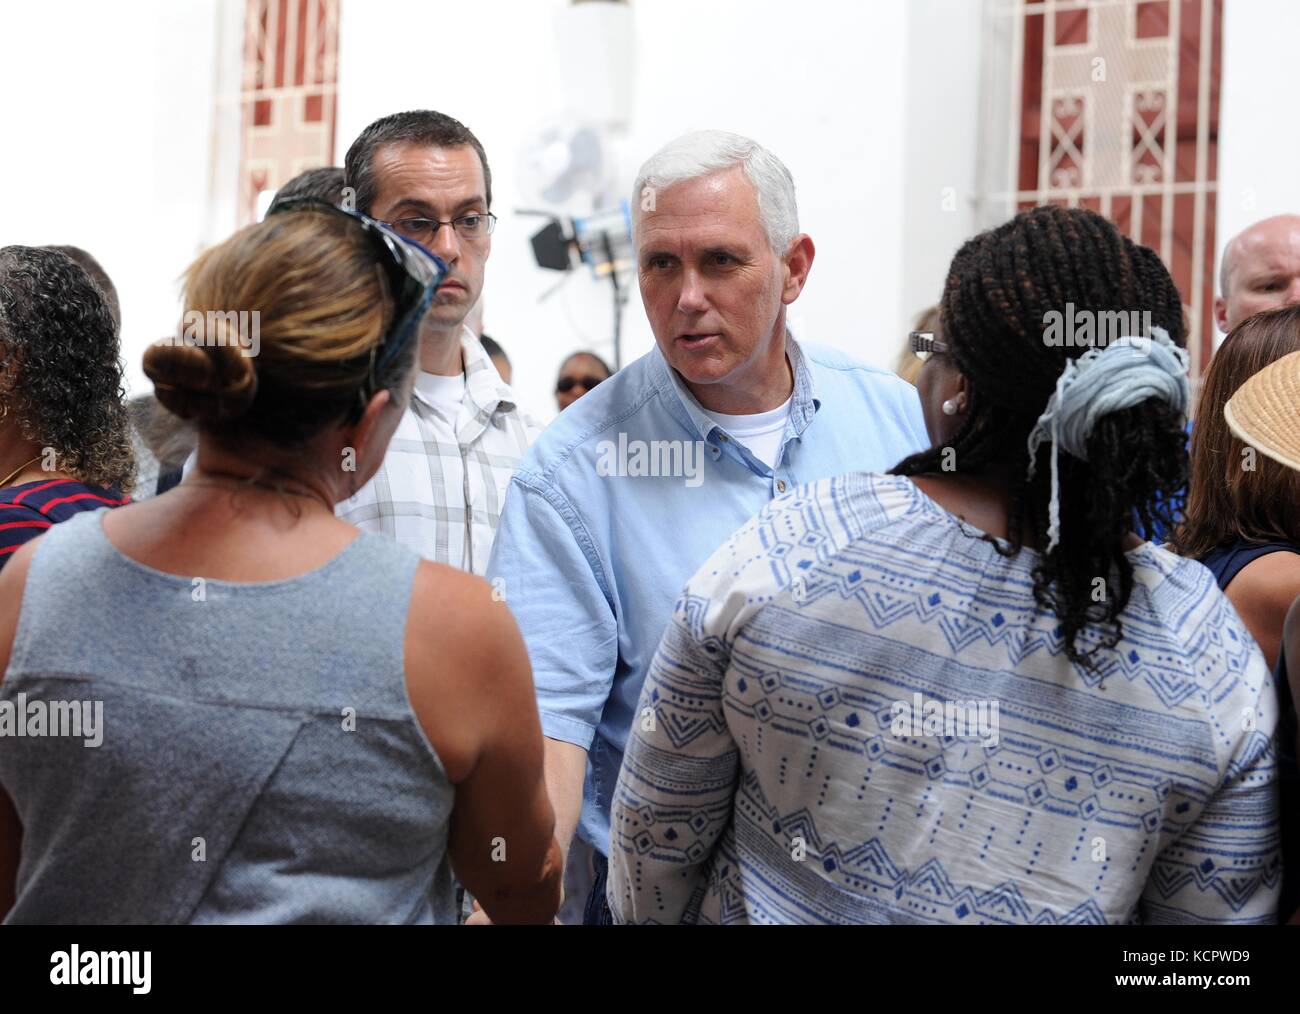 St Croix, USA. 6th Oct, 2017. U.S. Vice President Mike Pence greets parishioners outside the Holy Cross Episcopal Church October 6, 2017 in Christiansted, St. Croix, US Virgin Island. Pence is in the Virgin Islands to view relief efforts following destruction from Hurricane Maria. Credit: Planetpix/Alamy Live News Stock Photo